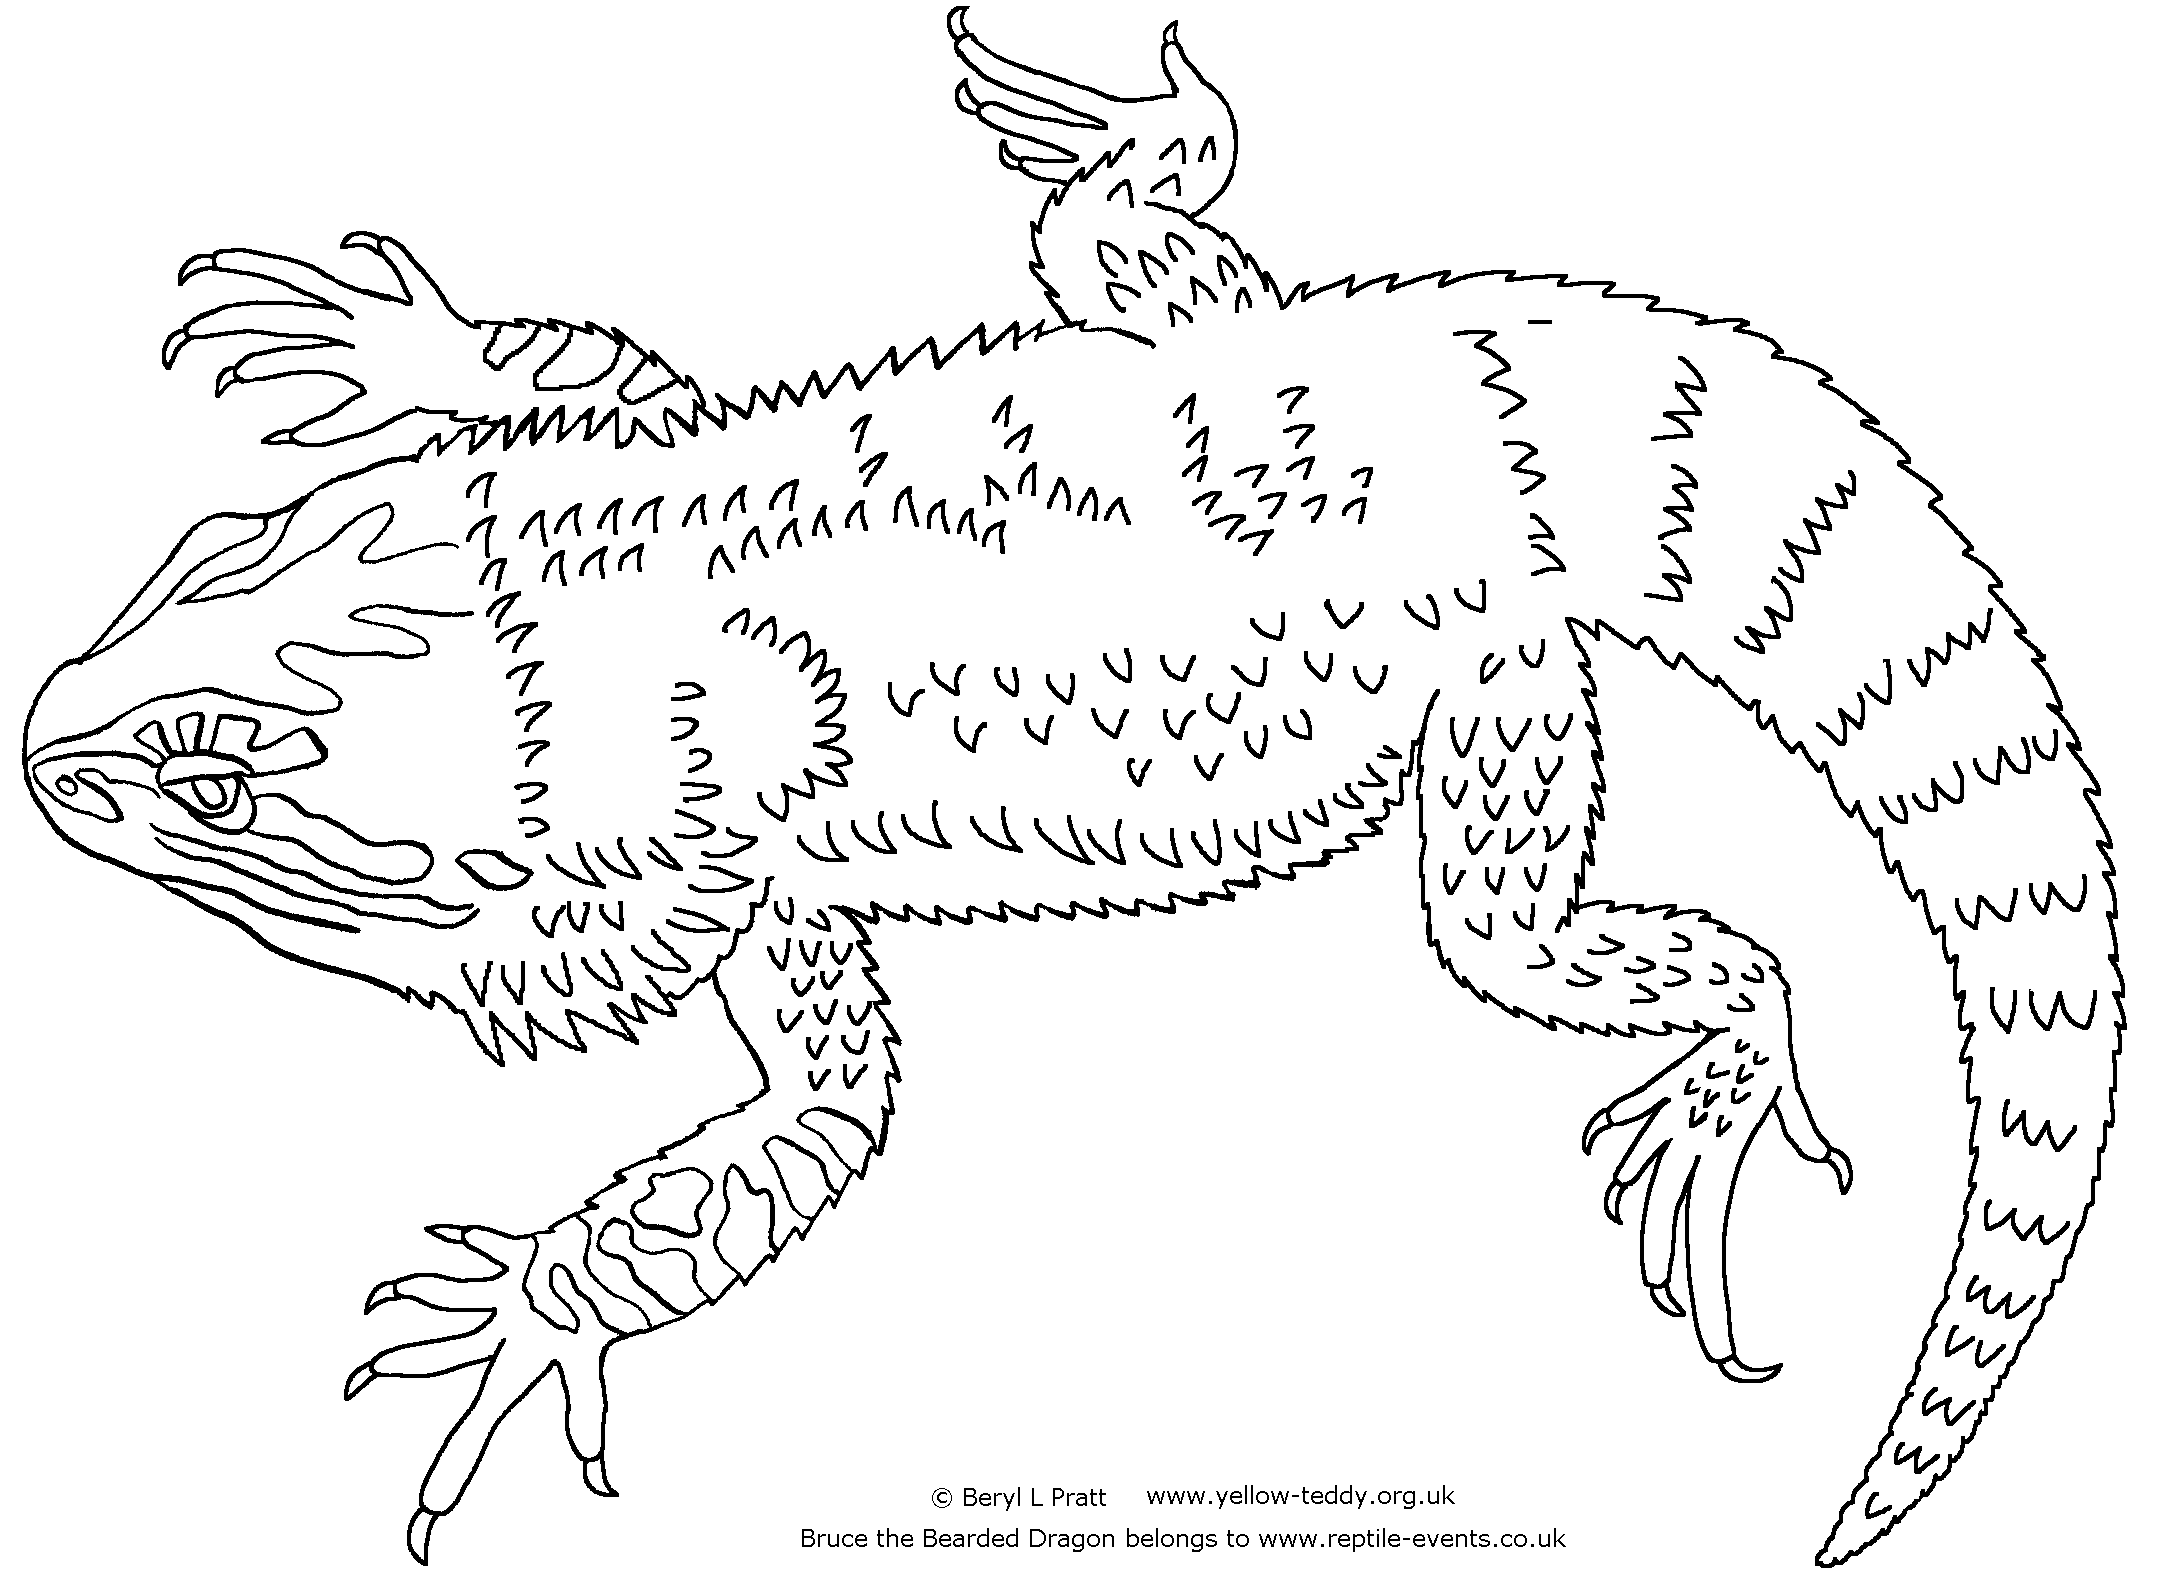 Bearded Dragon coloring #14, Download drawings